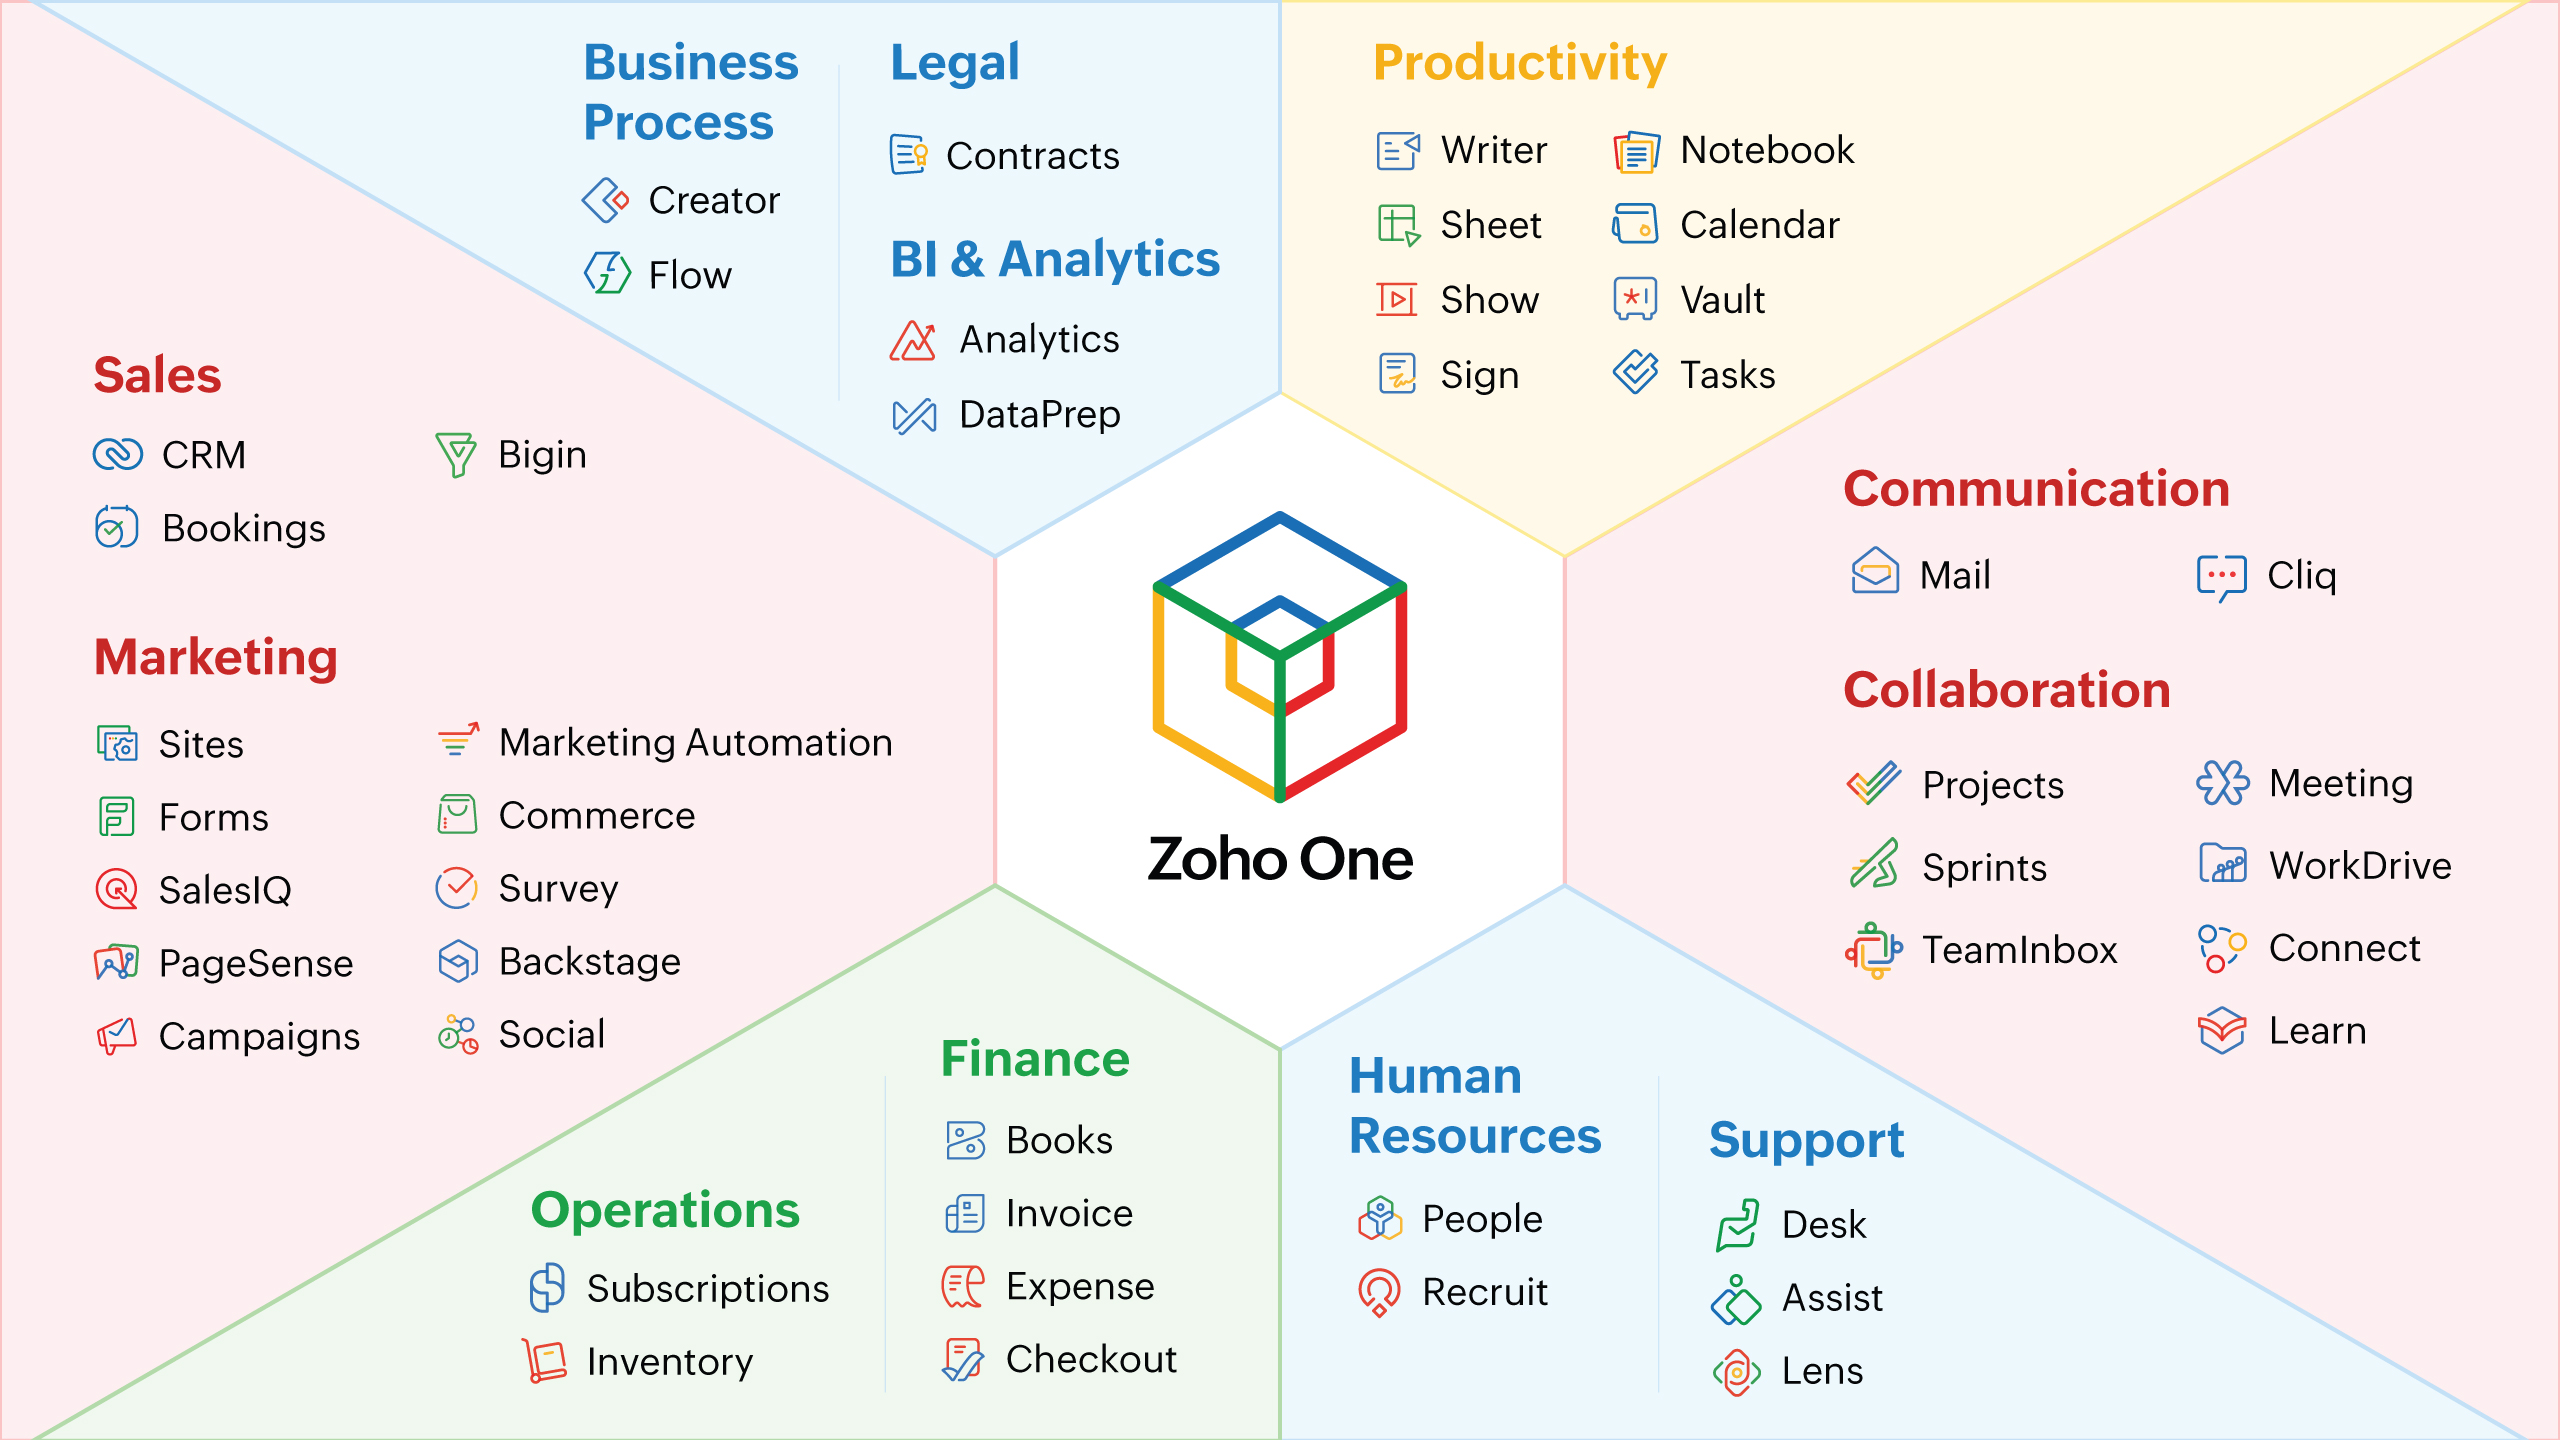 Zoho Celebrates the Five-Year Anniversary of Zoho One, Announcing Record Growth and Upmarket Momentum